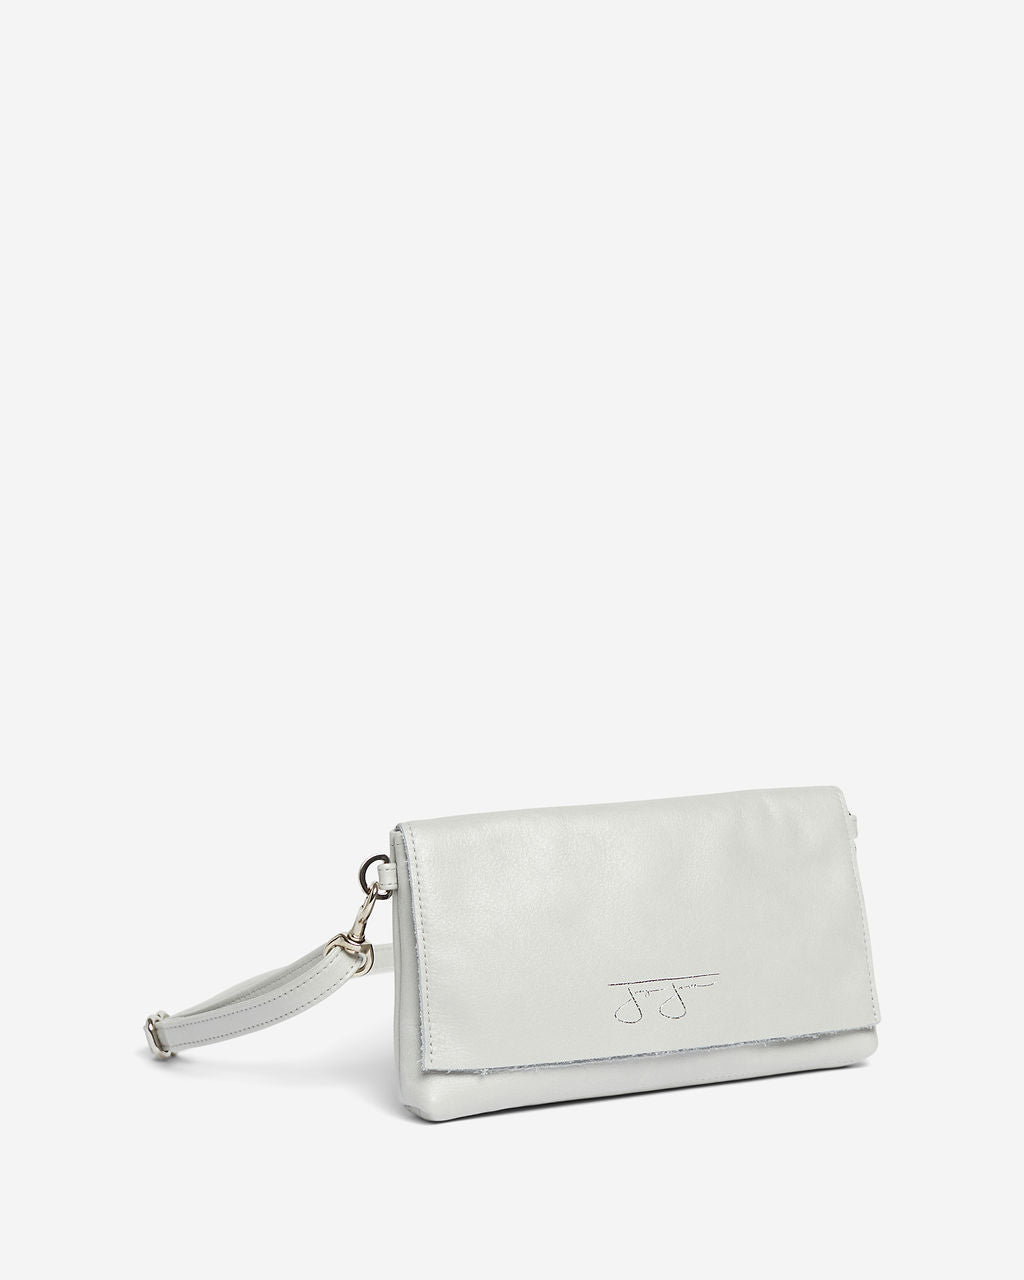 Norma Hipster Bag - Silver  Joey James, The Label   